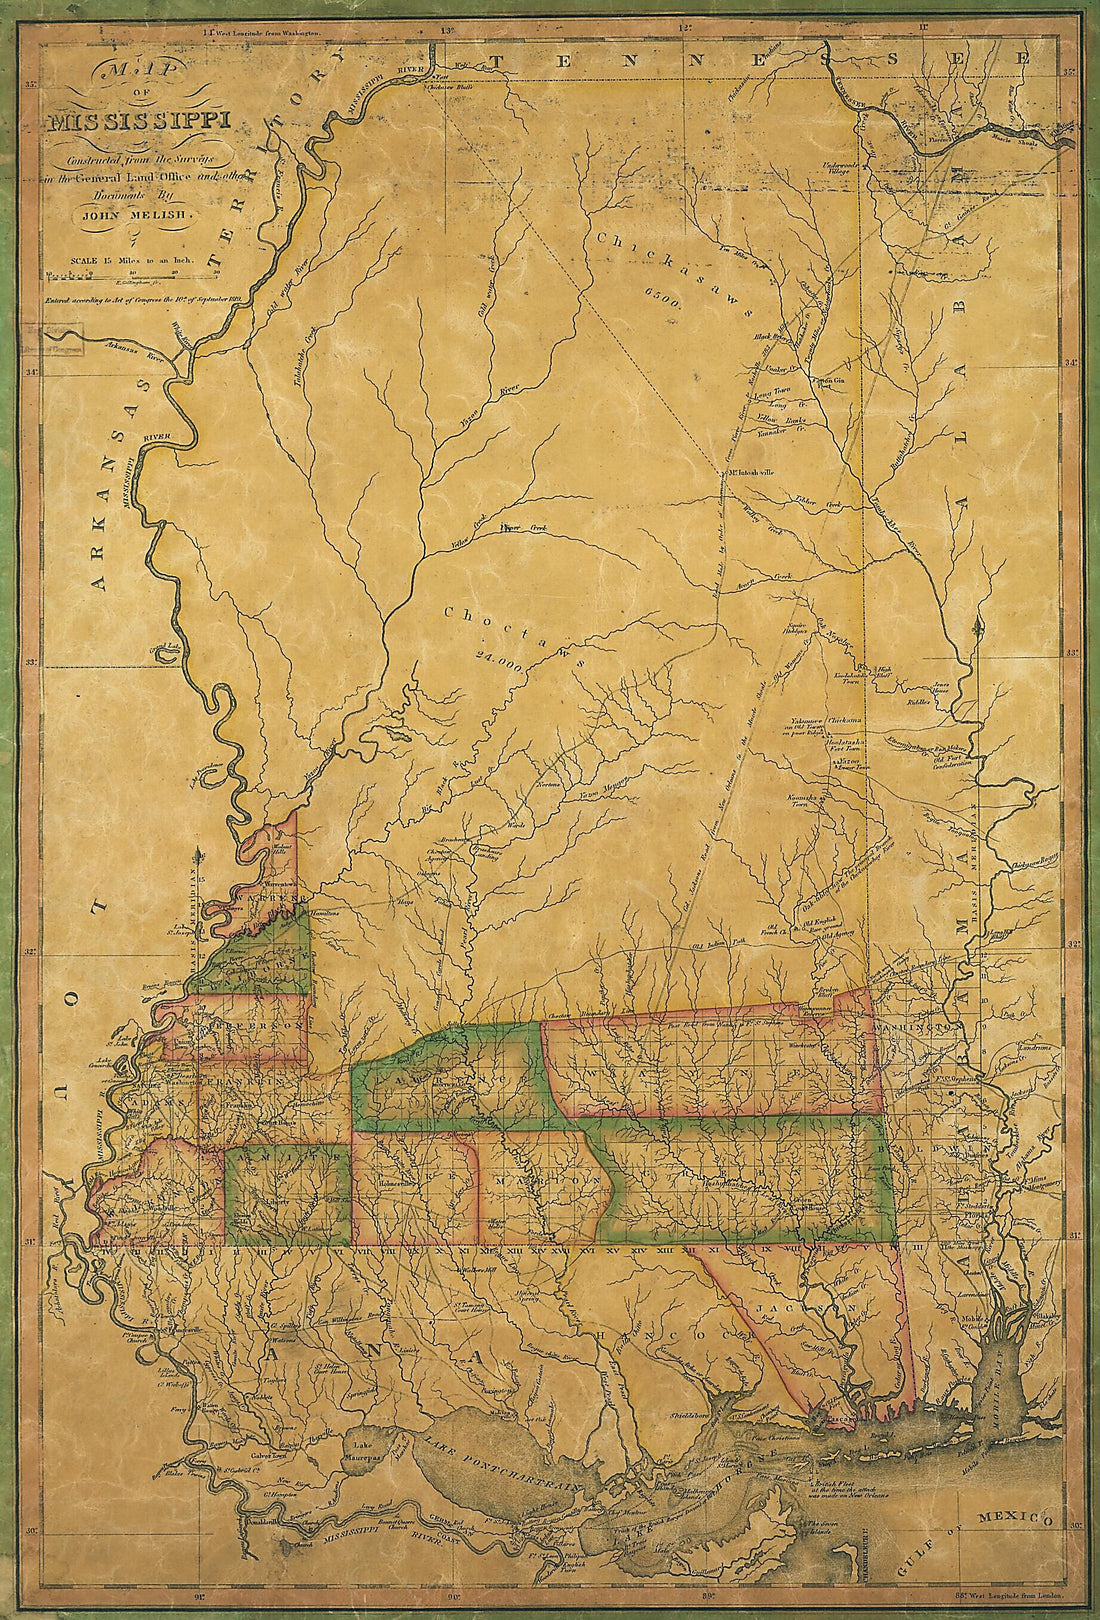 This old map of Map of Mississippi : Constructed from the Surveys In the General Land Office and Other Documents from 1820 was created by John Melish in 1820